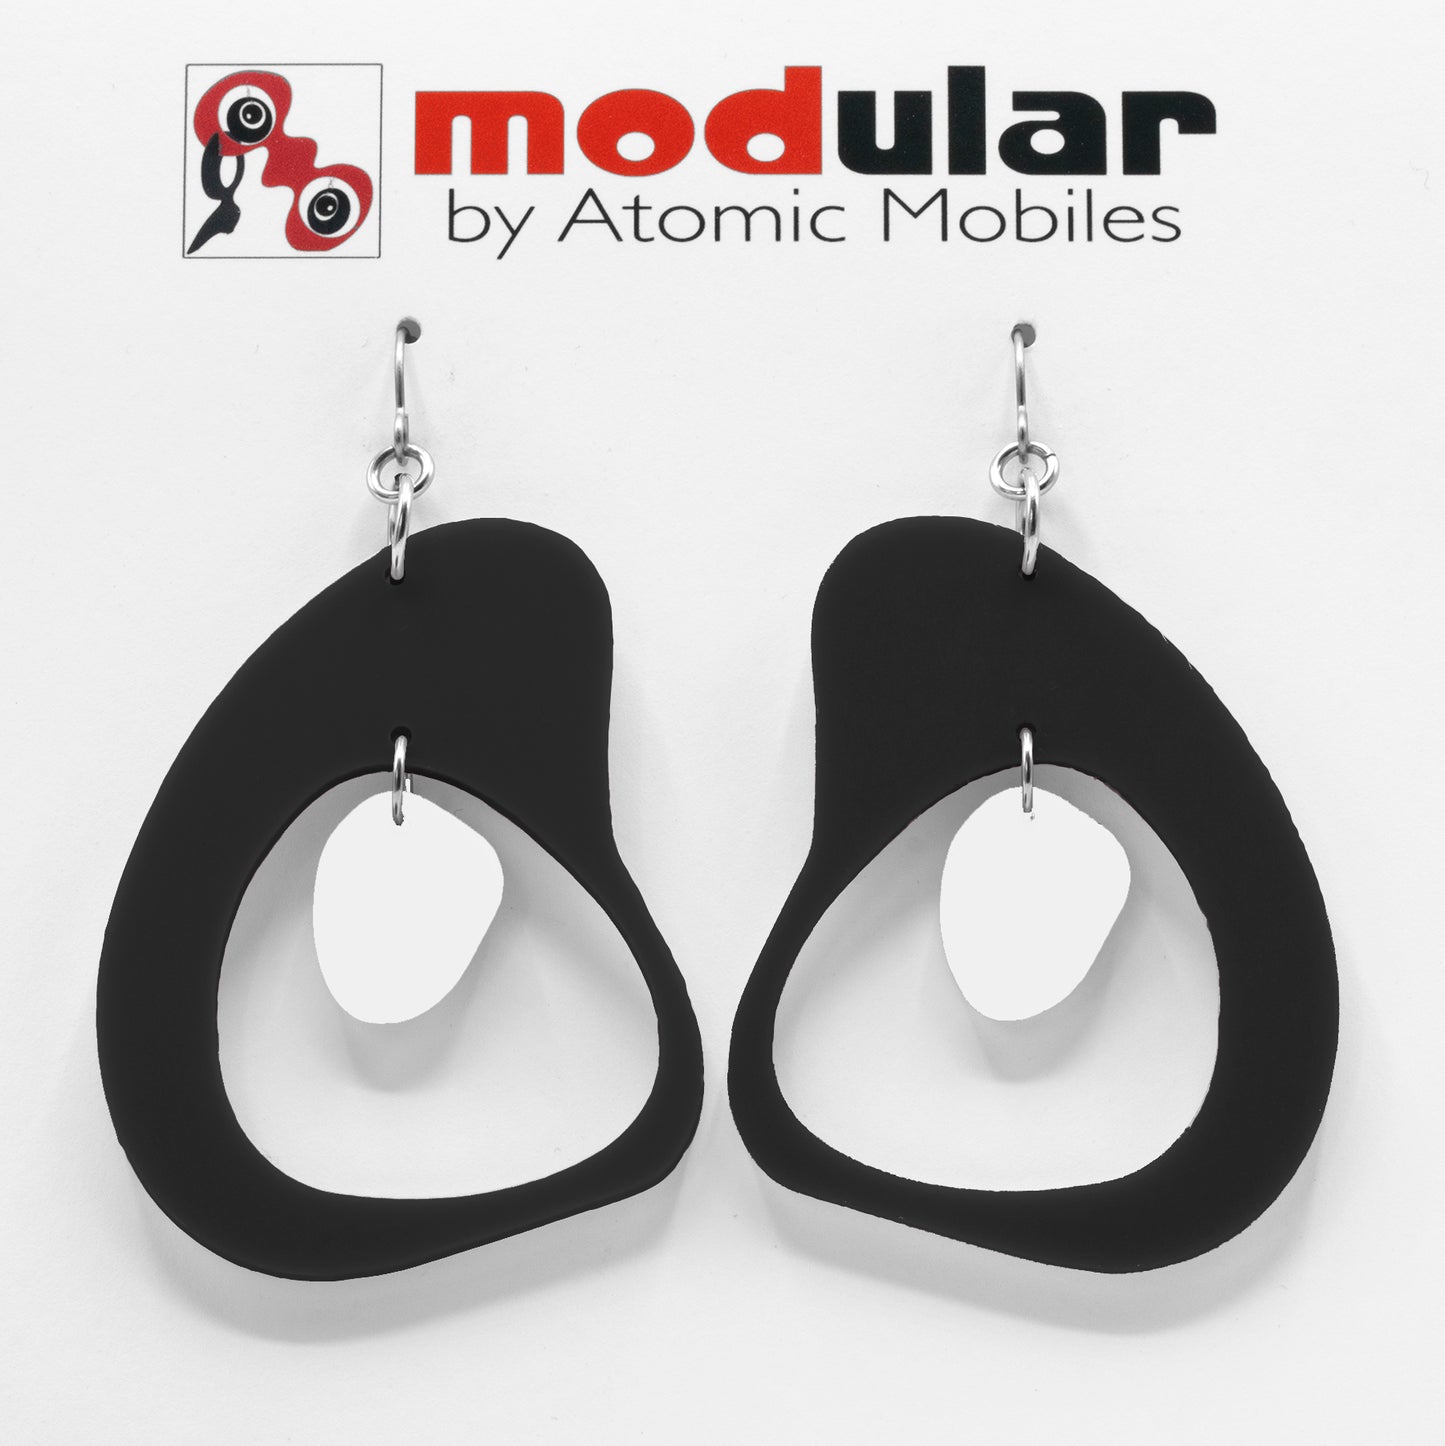 MODular Earrings - Boomerang Statement Earrings in Black and White by AtomicMobiles.com - retro era inspired mod handmade jewelry